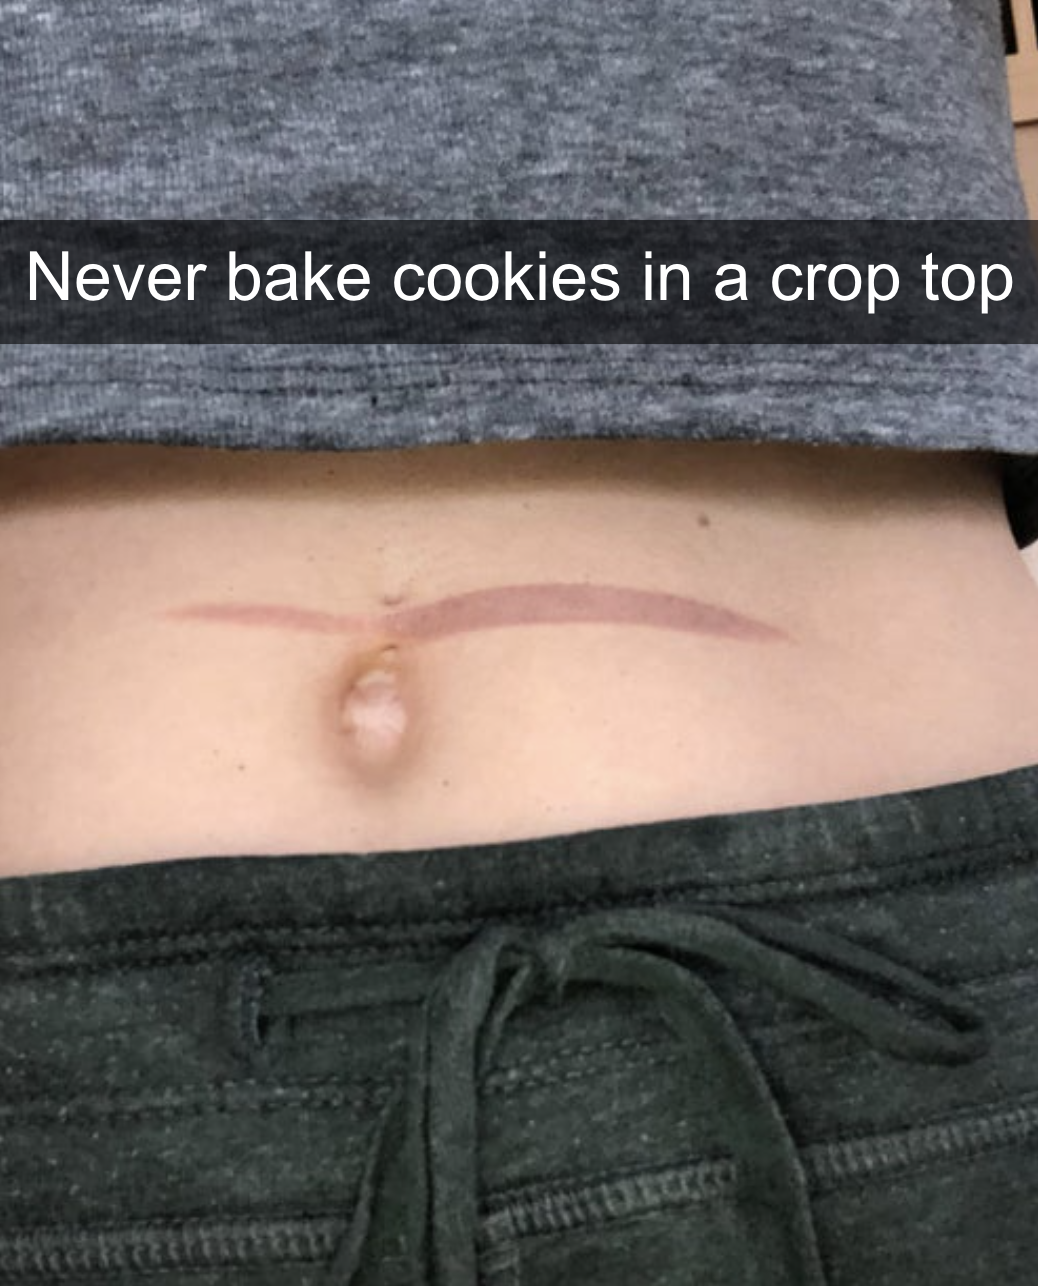 person who baked cookies in a crop top and got hurt